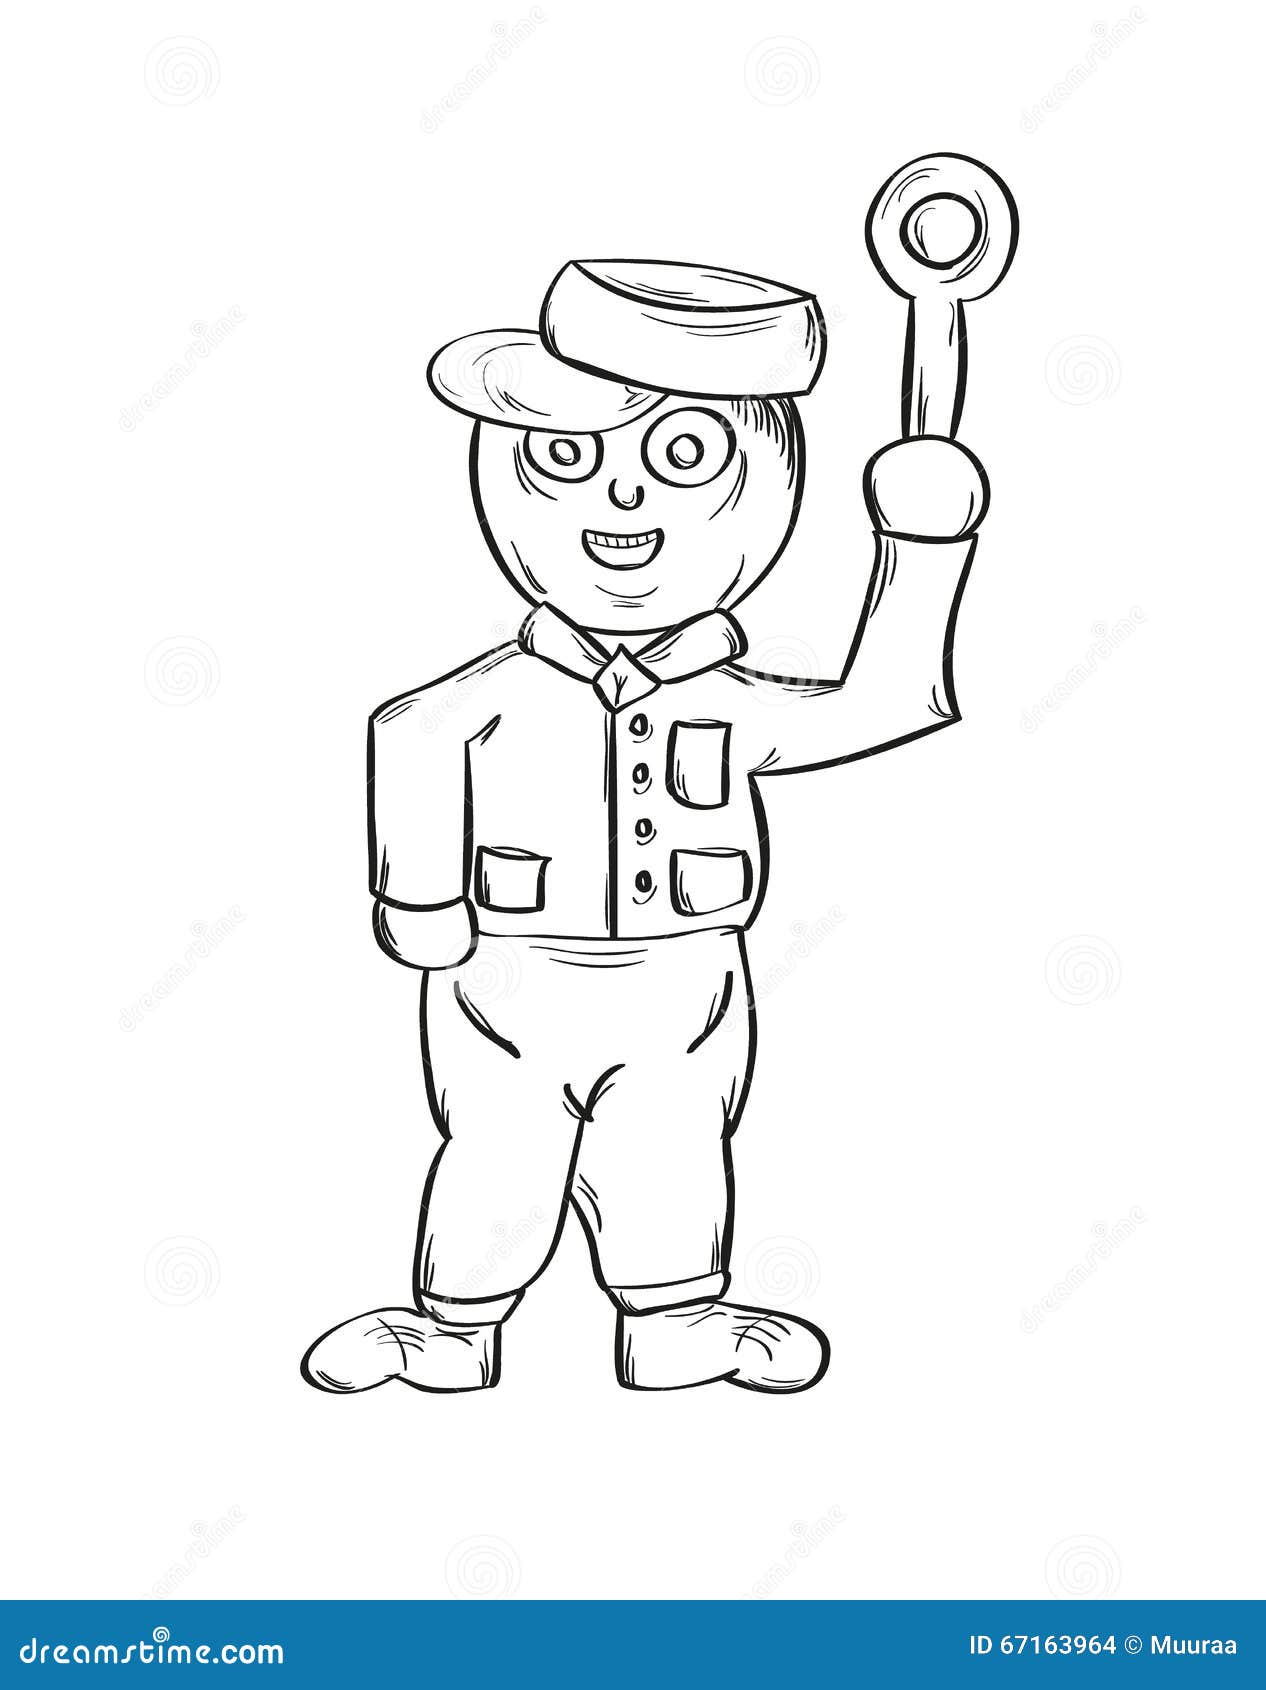 Sketch of the policeman or some kind of person with stop sign in hand  isolated vector  CanStock